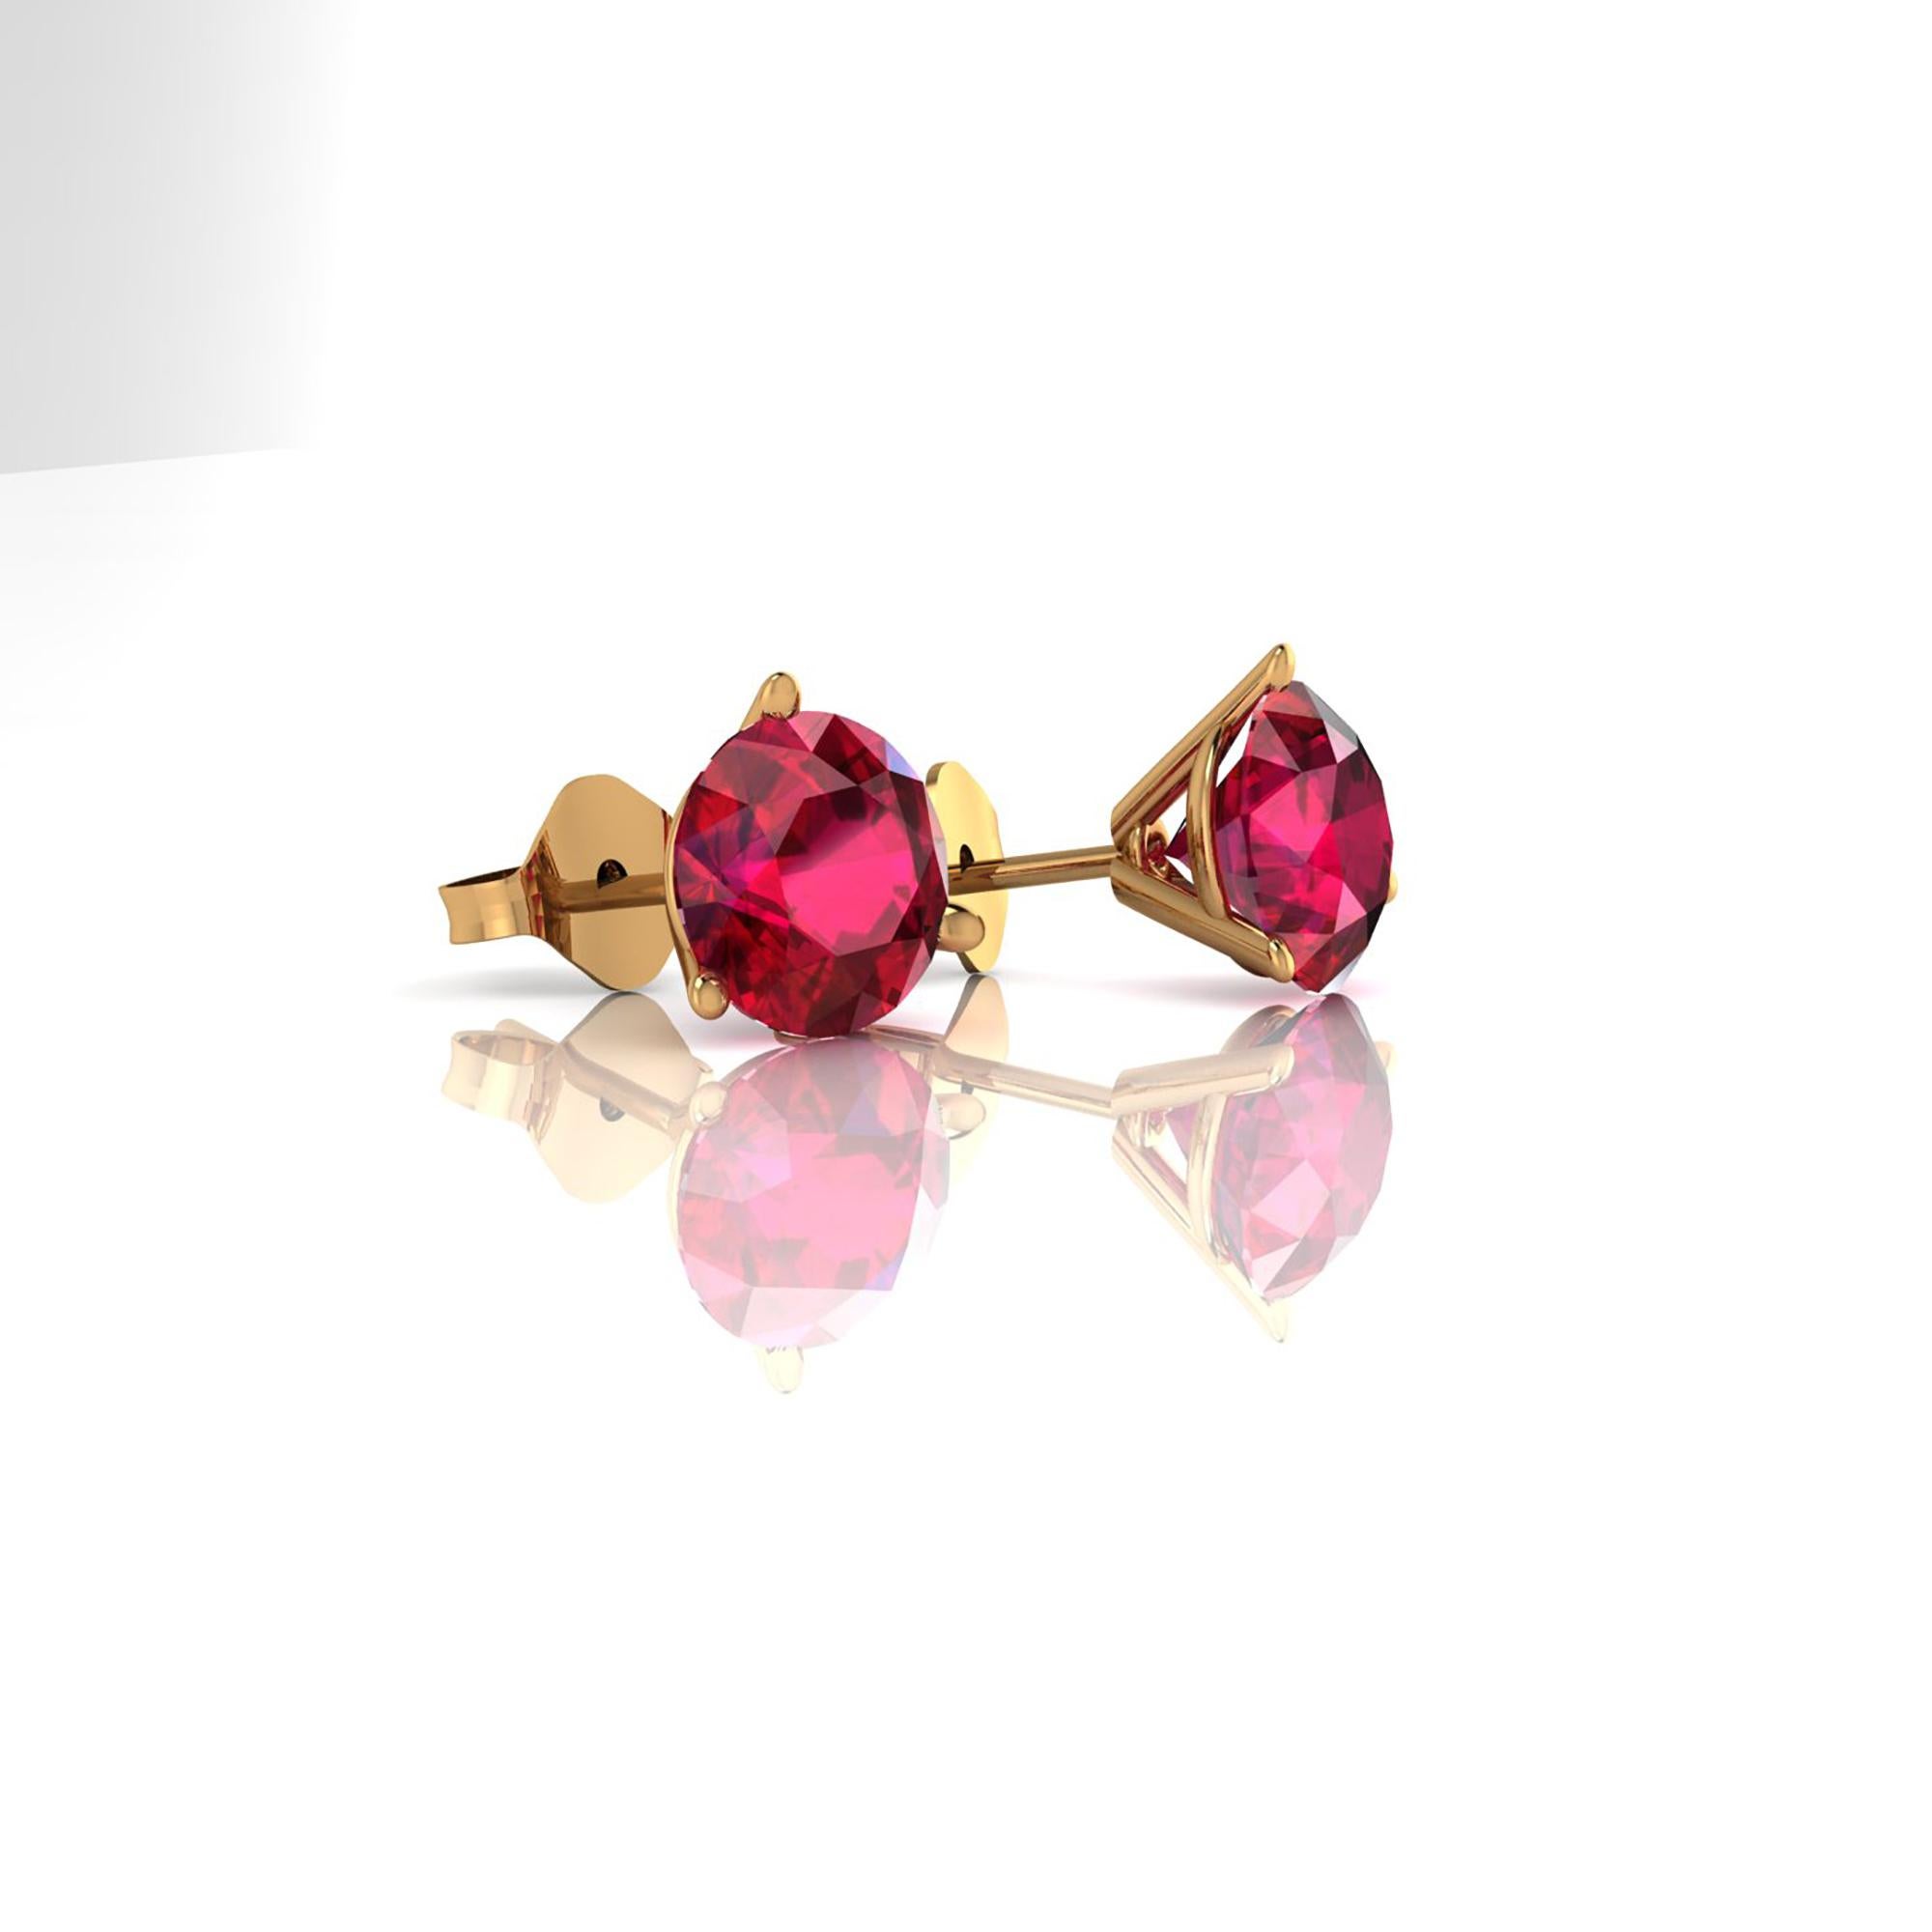 Contemporary 2.48 Carat Ruby Burma Pigeon Blood Red Earrings Martini Studs 18k Yellow Gold For Sale